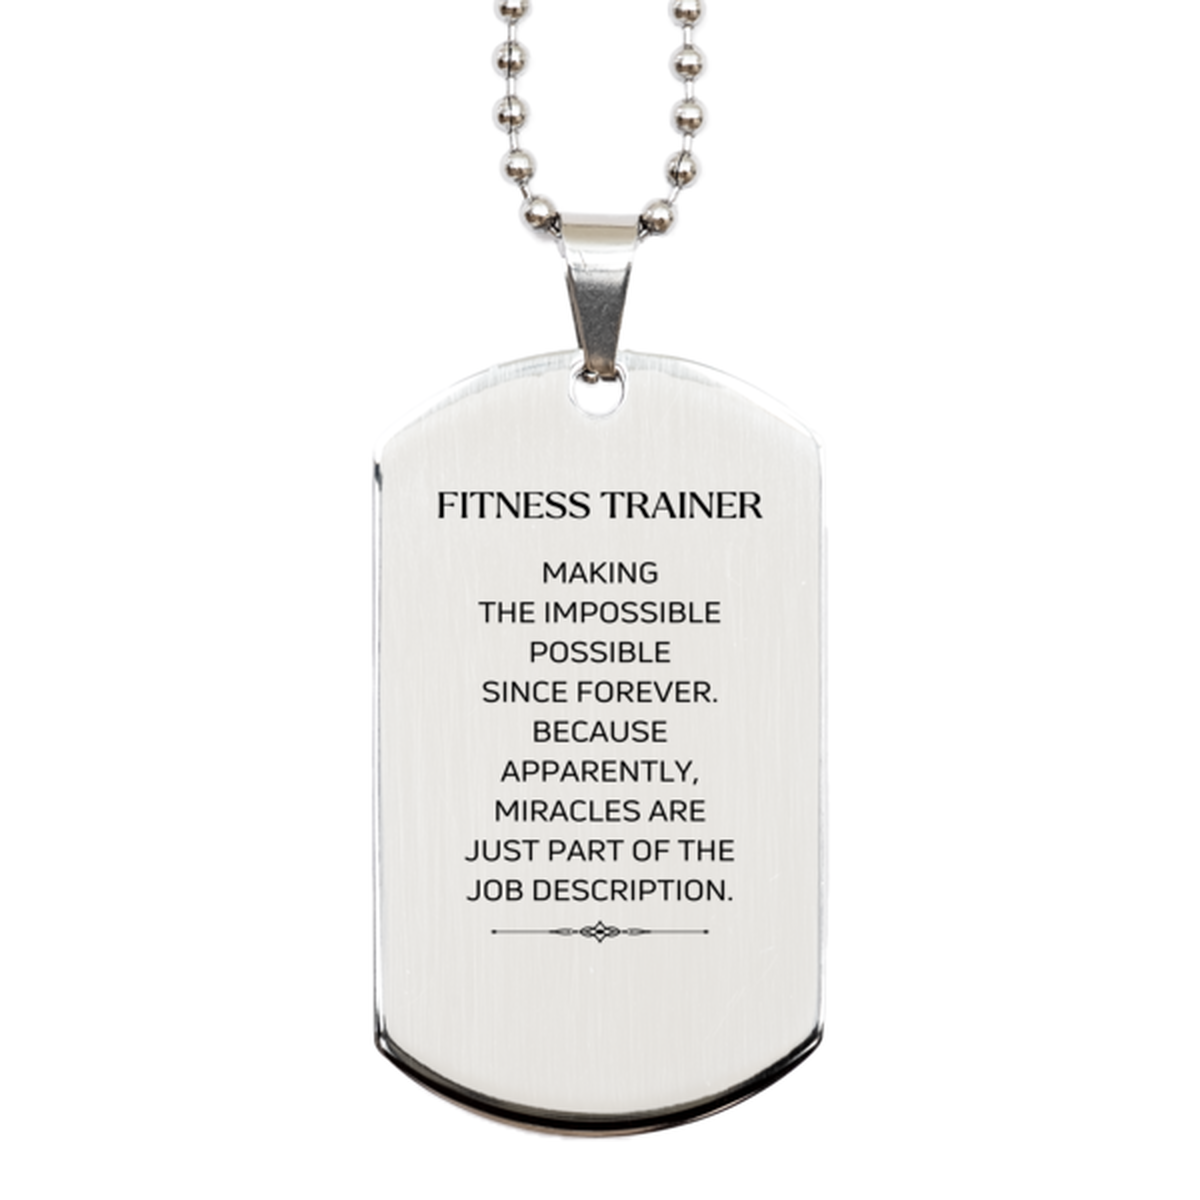 Funny Fitness Trainer Gifts, Miracles are just part of the job description, Inspirational Birthday Silver Dog Tag For Fitness Trainer, Men, Women, Coworkers, Friends, Boss